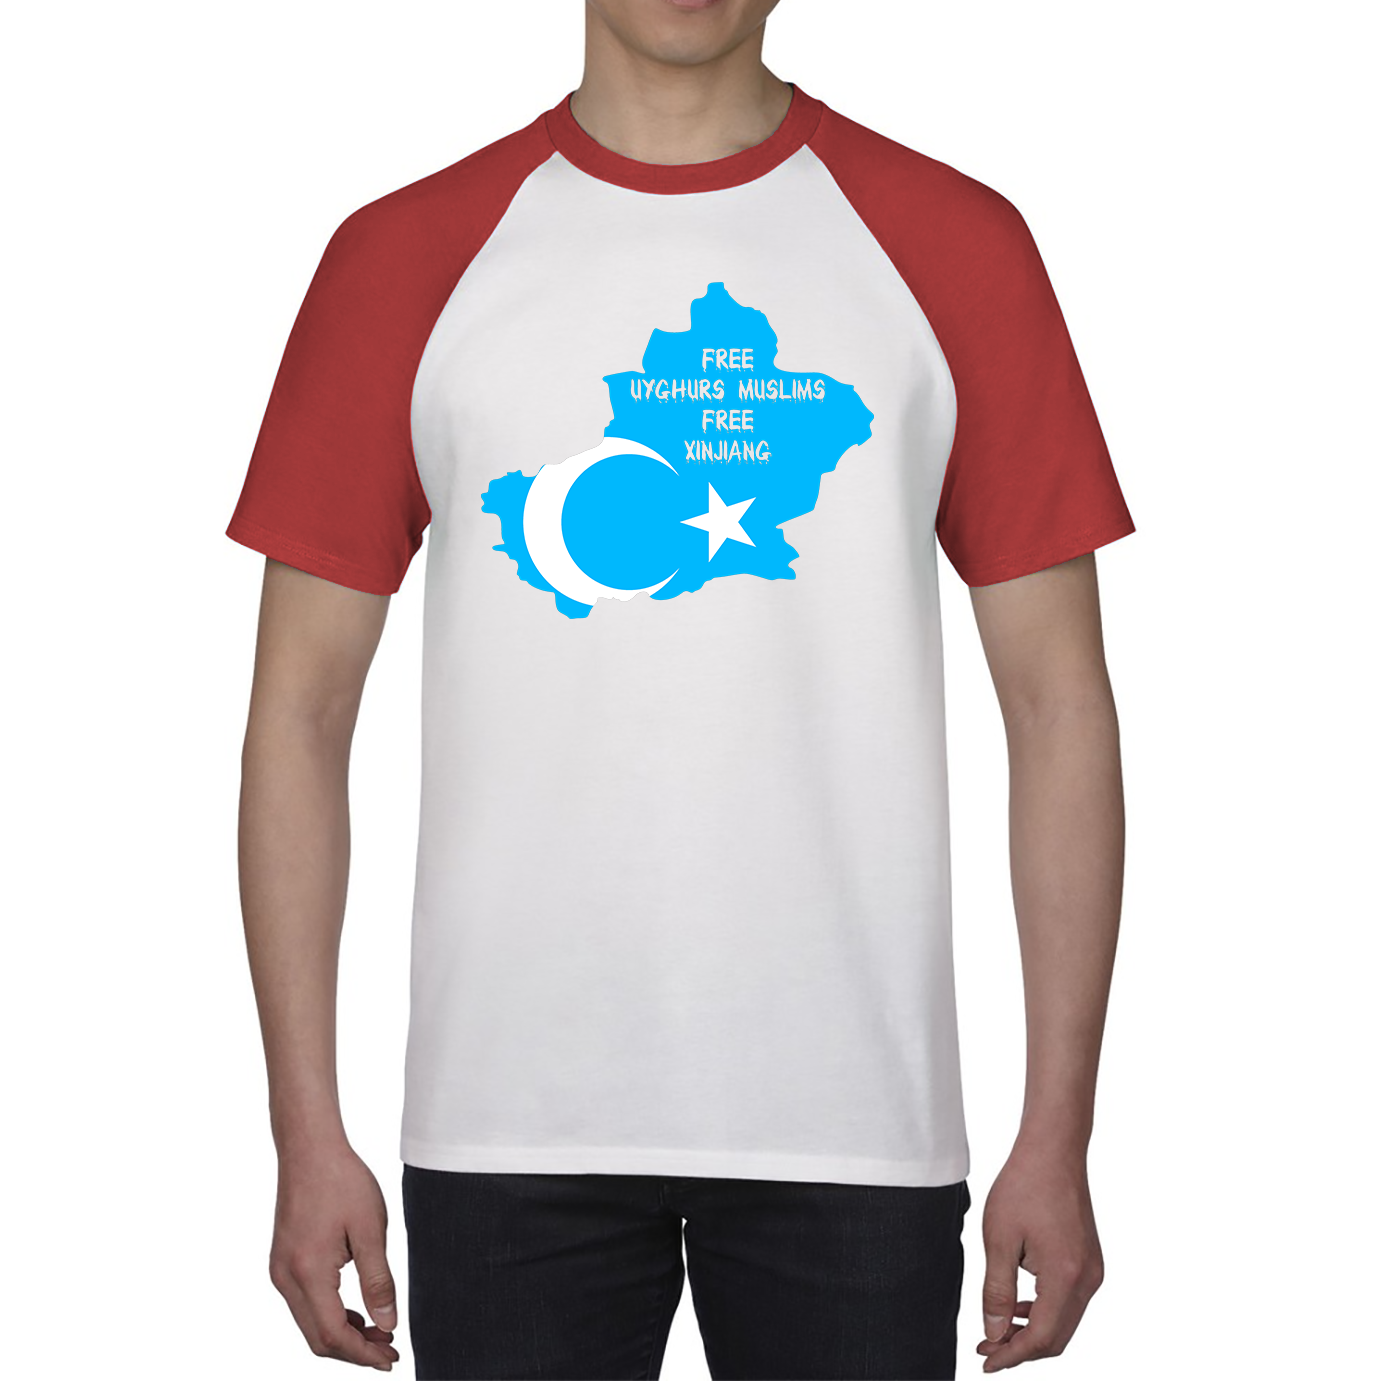 Free Uyghurs Muslims Free Xinjiang Freedom For Uygurs Uigurs East Turkestan Support And Freedom Baseball T Shirt